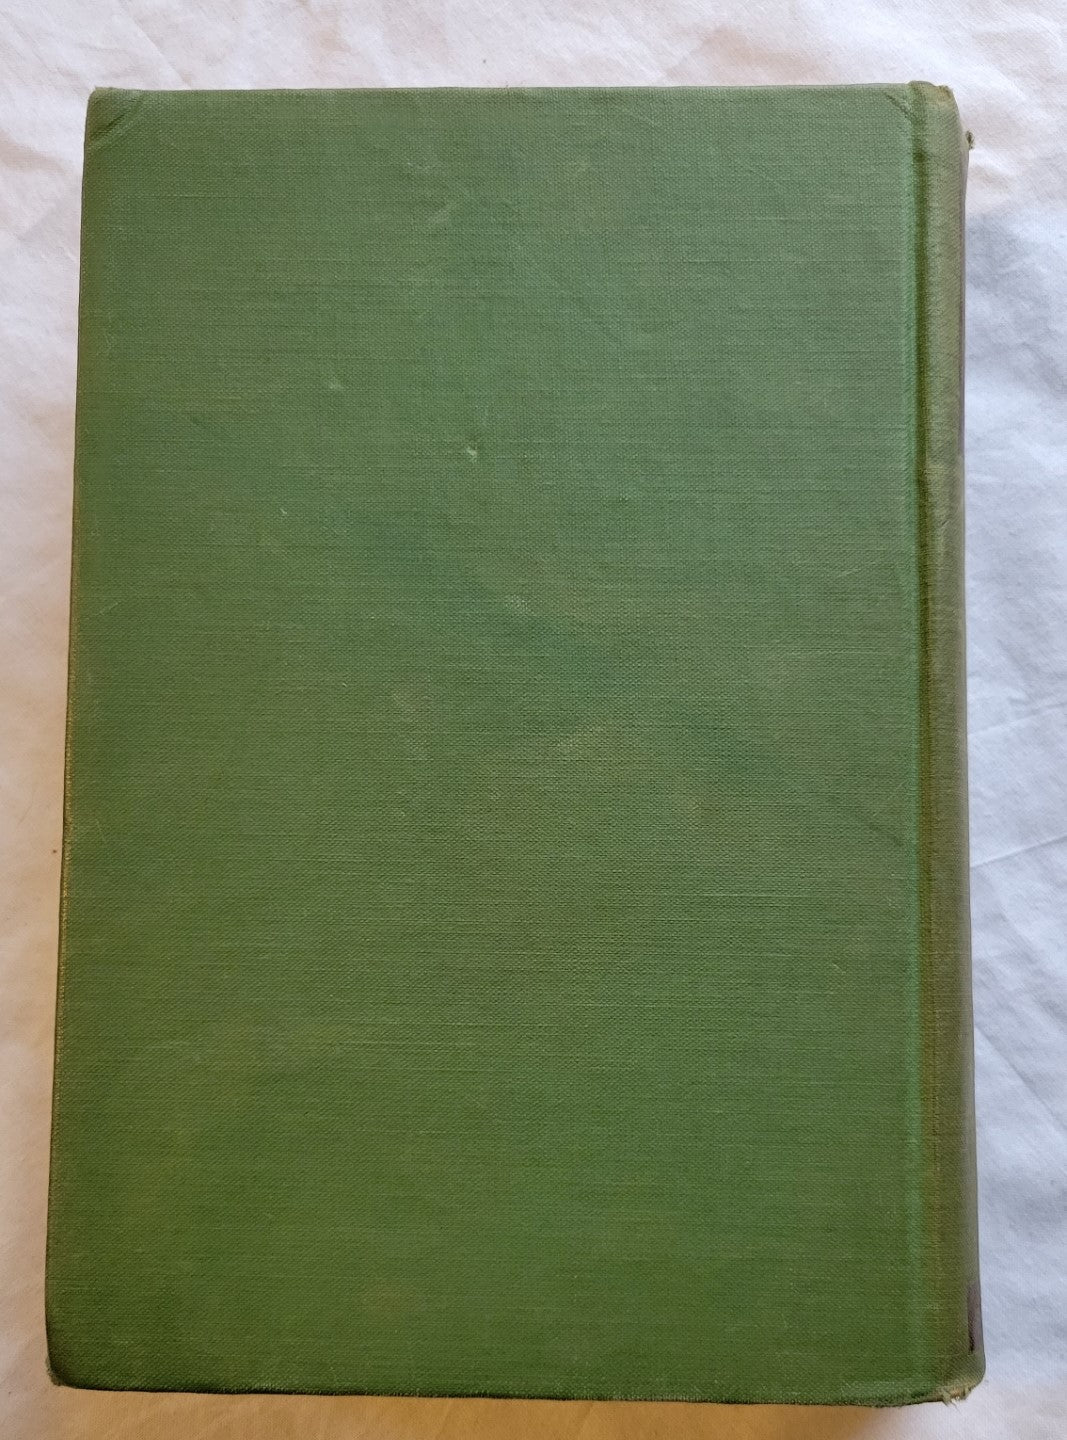 Vintage book. "Collected Stories" by William Faulkner, published by Random House. View of back cover.